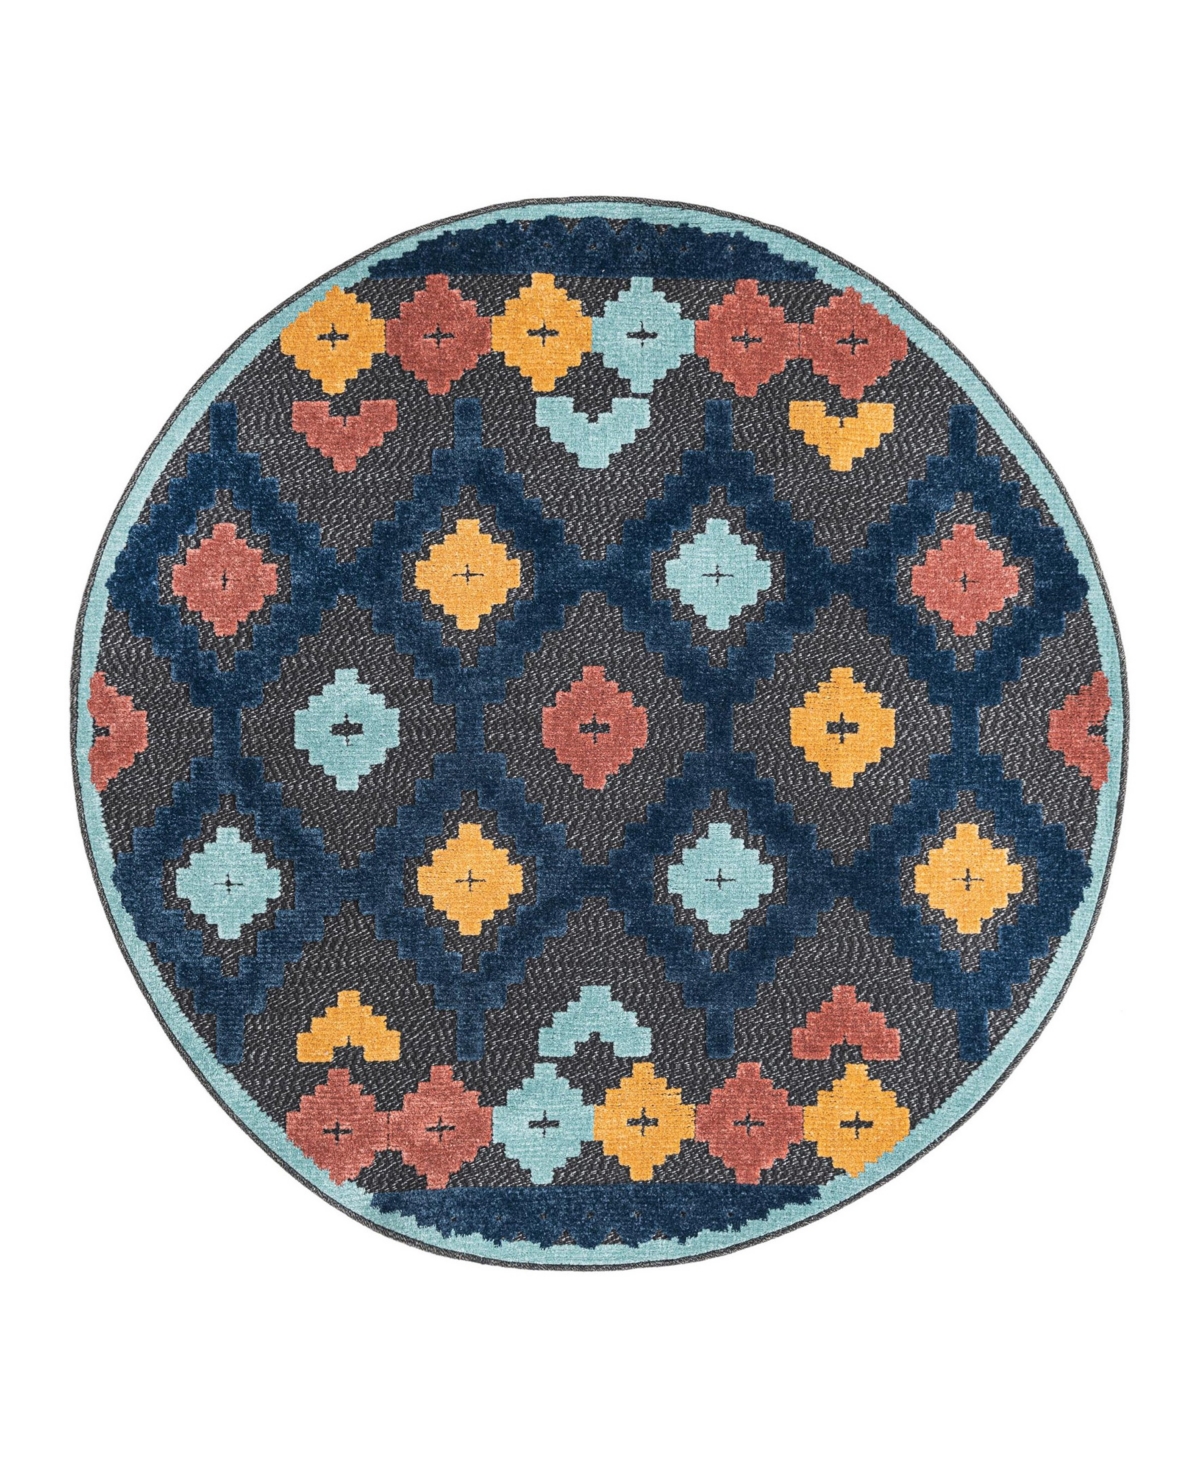 Bayshore Home Cayes Outdoor High-low Pile Cay-12 5'3" X 5'3" Round Area Rug In Charcoal